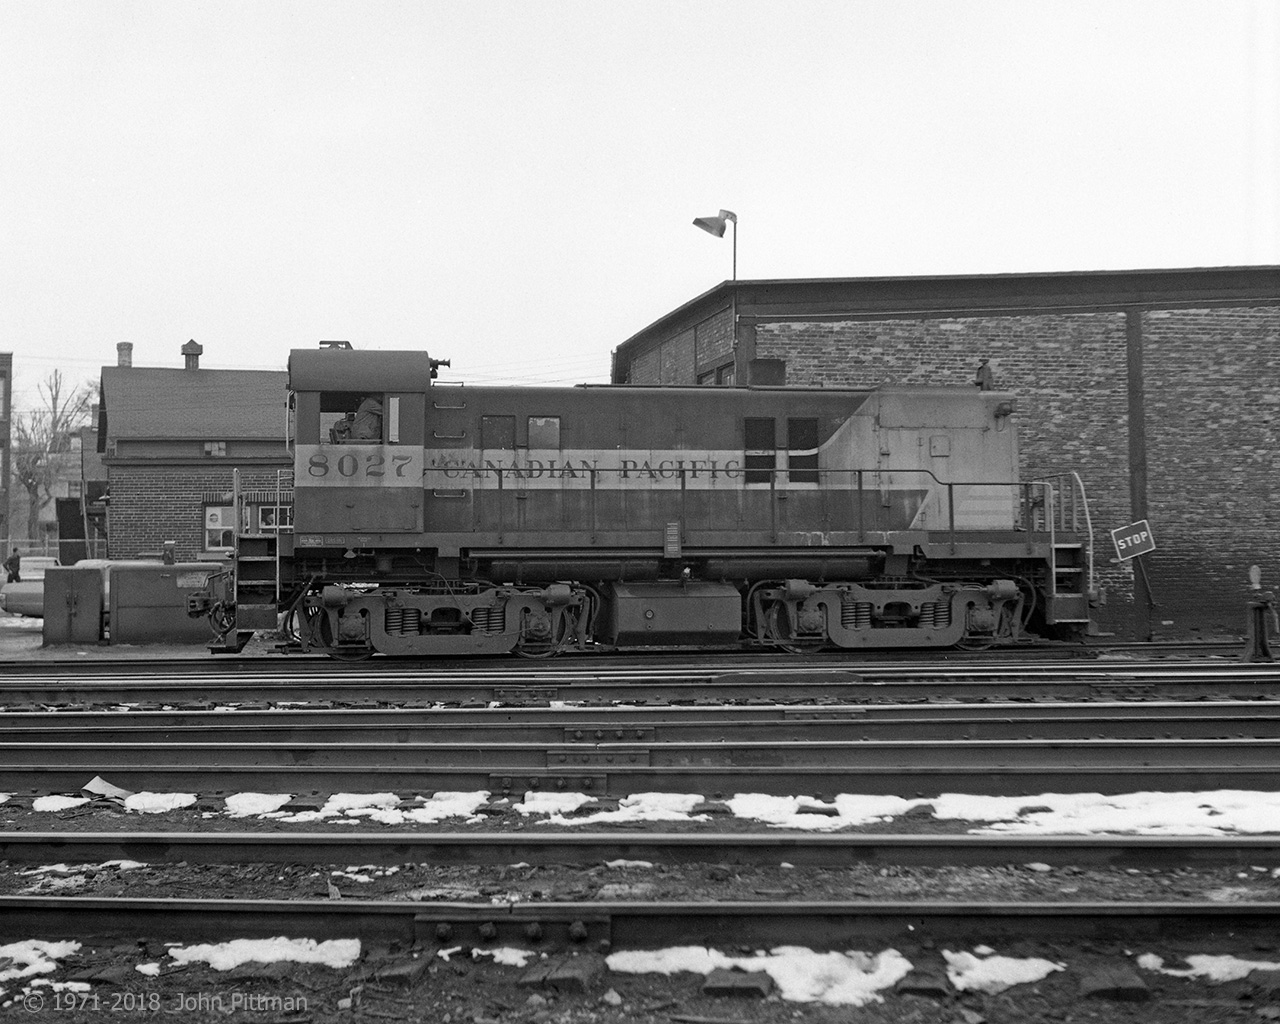 MLW RS-23 CP 8027 is seen here beside the Trois-Rivieres roundhouse in (approx) March 1971. In 1970-71 its siblings CP 8035 and 8040 were much more frequently seen here. The RS-23's did their yard switching singly, I never saw them MU'd in pairs. Alco S-2 switcher CP 7042 was another regular.  
No structure or tree visible beyond the tracks remains - the CP structures were all demolished, while the adjacent neighborhood was cleared to make way for Quebec Autoroute 40. Quebec Gatineau Railway serves T-R now.